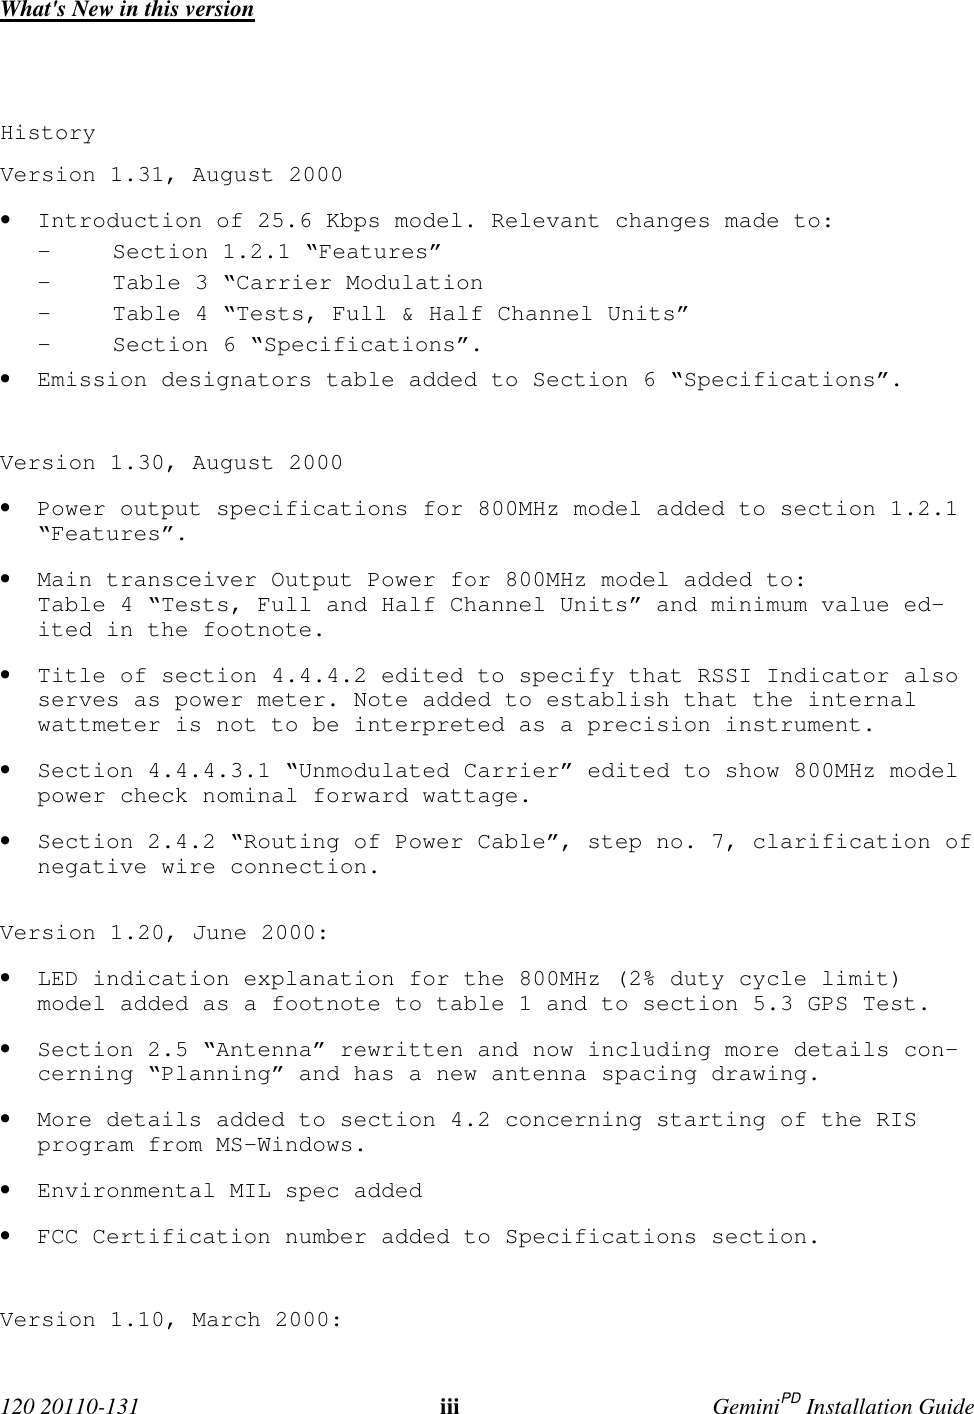  120 20110-131 iii GeminiPD Installation GuideWhat&apos;s New in this versionHistoryVersion 1.31, August 2000• Introduction of 25.6 Kbps model. Relevant changes made to:- Section 1.2.1 “Features”- Table 3 “Carrier Modulation- Table 4 “Tests, Full &amp; Half Channel Units”- Section 6 “Specifications”.• Emission designators table added to Section 6 “Specifications”.Version 1.30, August 2000• Power output specifications for 800MHz model added to section 1.2.1“Features”.• Main transceiver Output Power for 800MHz model added to:Table 4 “Tests, Full and Half Channel Units” and minimum value ed-ited in the footnote.• Title of section 4.4.4.2 edited to specify that RSSI Indicator alsoserves as power meter. Note added to establish that the internalwattmeter is not to be interpreted as a precision instrument.• Section 4.4.4.3.1 “Unmodulated Carrier” edited to show 800MHz modelpower check nominal forward wattage.• Section 2.4.2 “Routing of Power Cable”, step no. 7, clarification ofnegative wire connection.Version 1.20, June 2000:• LED indication explanation for the 800MHz (2% duty cycle limit)model added as a footnote to table 1 and to section 5.3 GPS Test.• Section 2.5 “Antenna” rewritten and now including more details con-cerning “Planning” and has a new antenna spacing drawing.• More details added to section 4.2 concerning starting of the RISprogram from MS-Windows.• Environmental MIL spec added• FCC Certification number added to Specifications section.Version 1.10, March 2000: